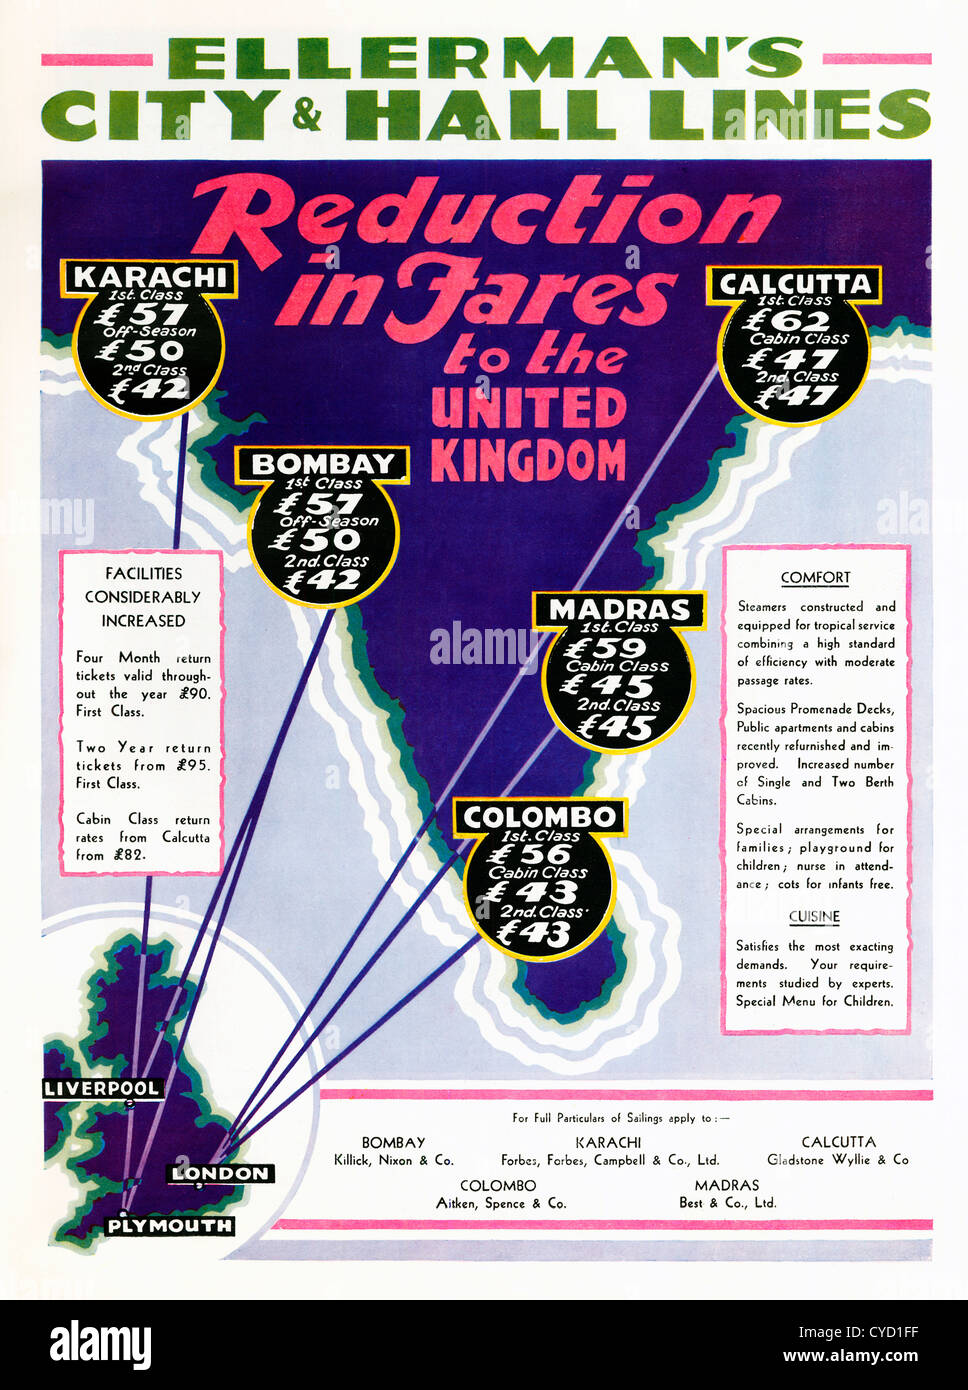 Ellermans City and Hall LInes, 1932 advert for the shipping line joining up the British Empire, here with cheaper fares to India Stock Photo